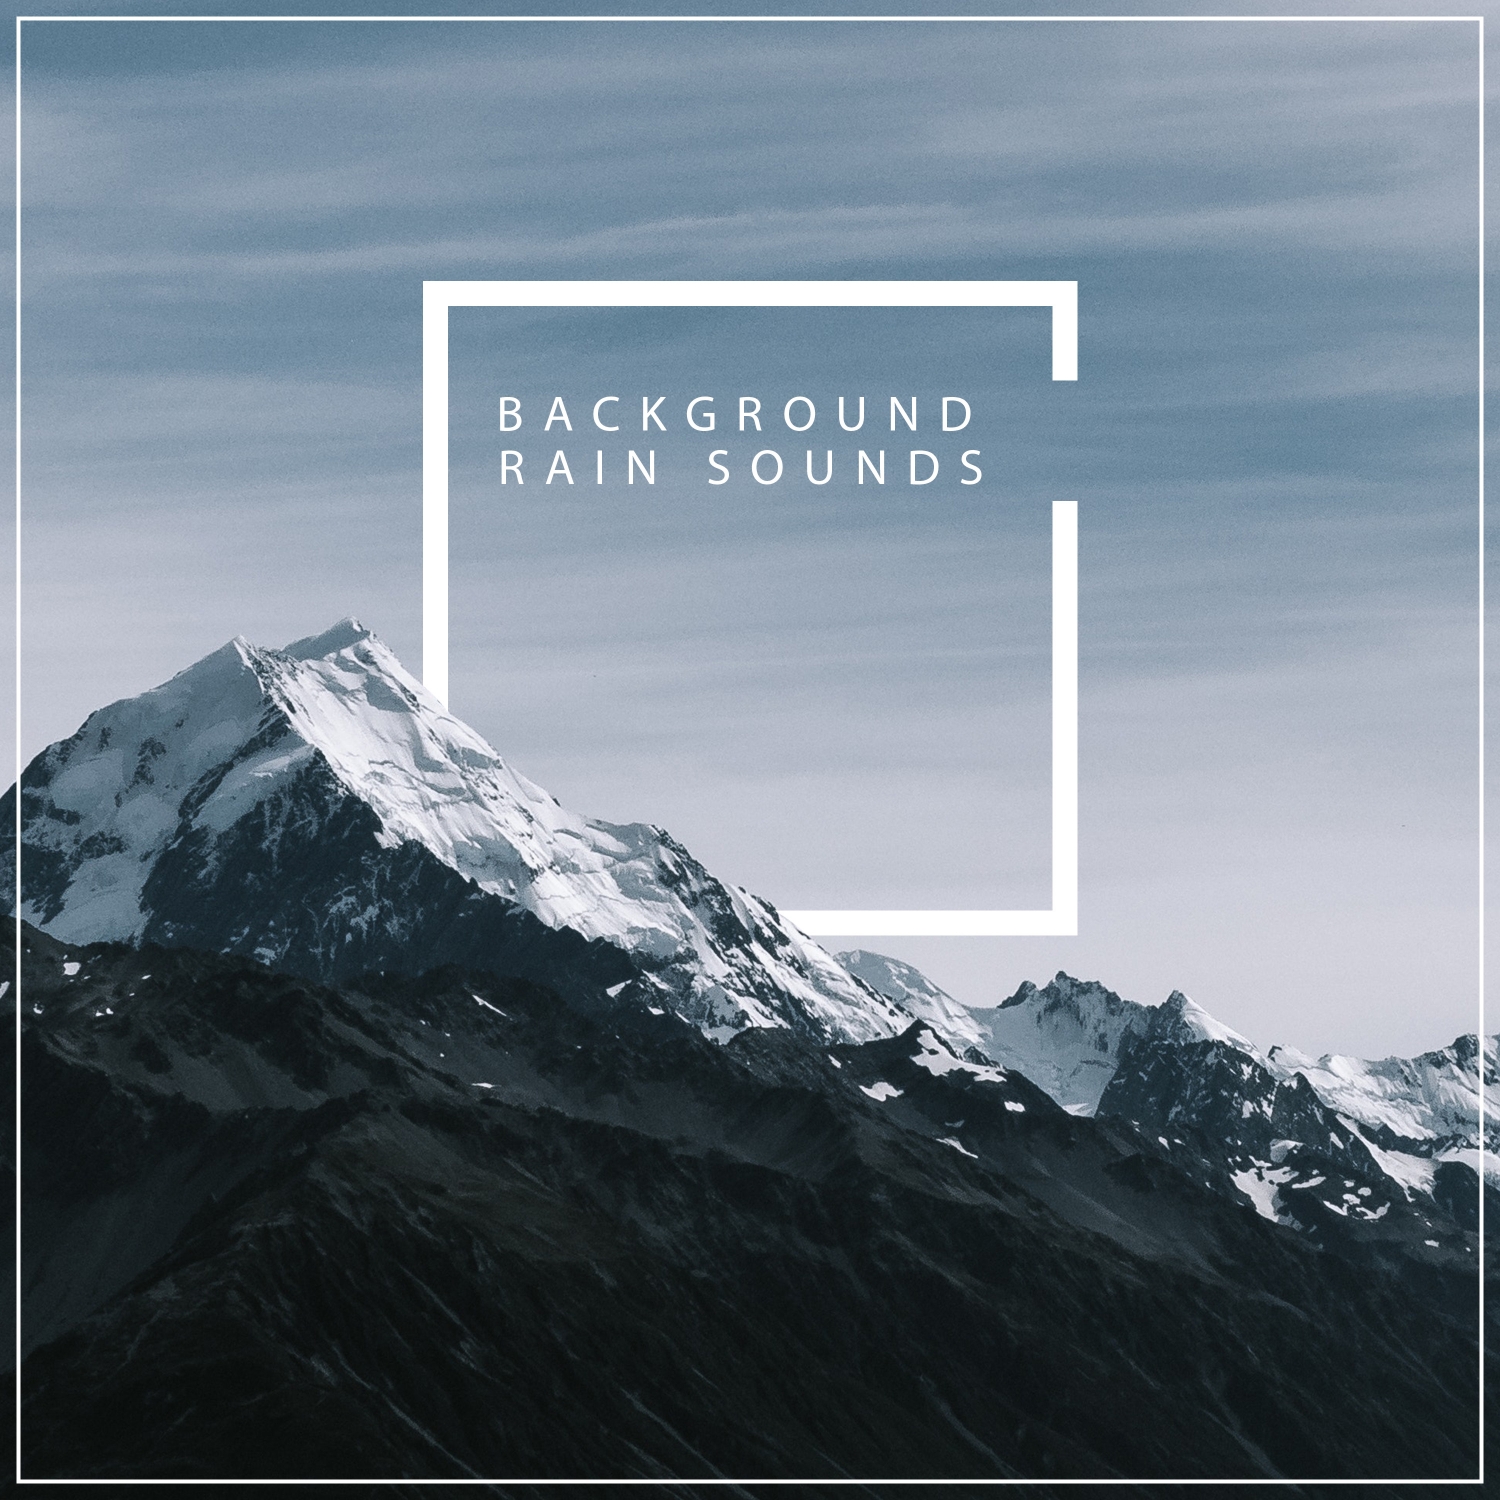 11 Background Rain Songs for Spa Relaxation